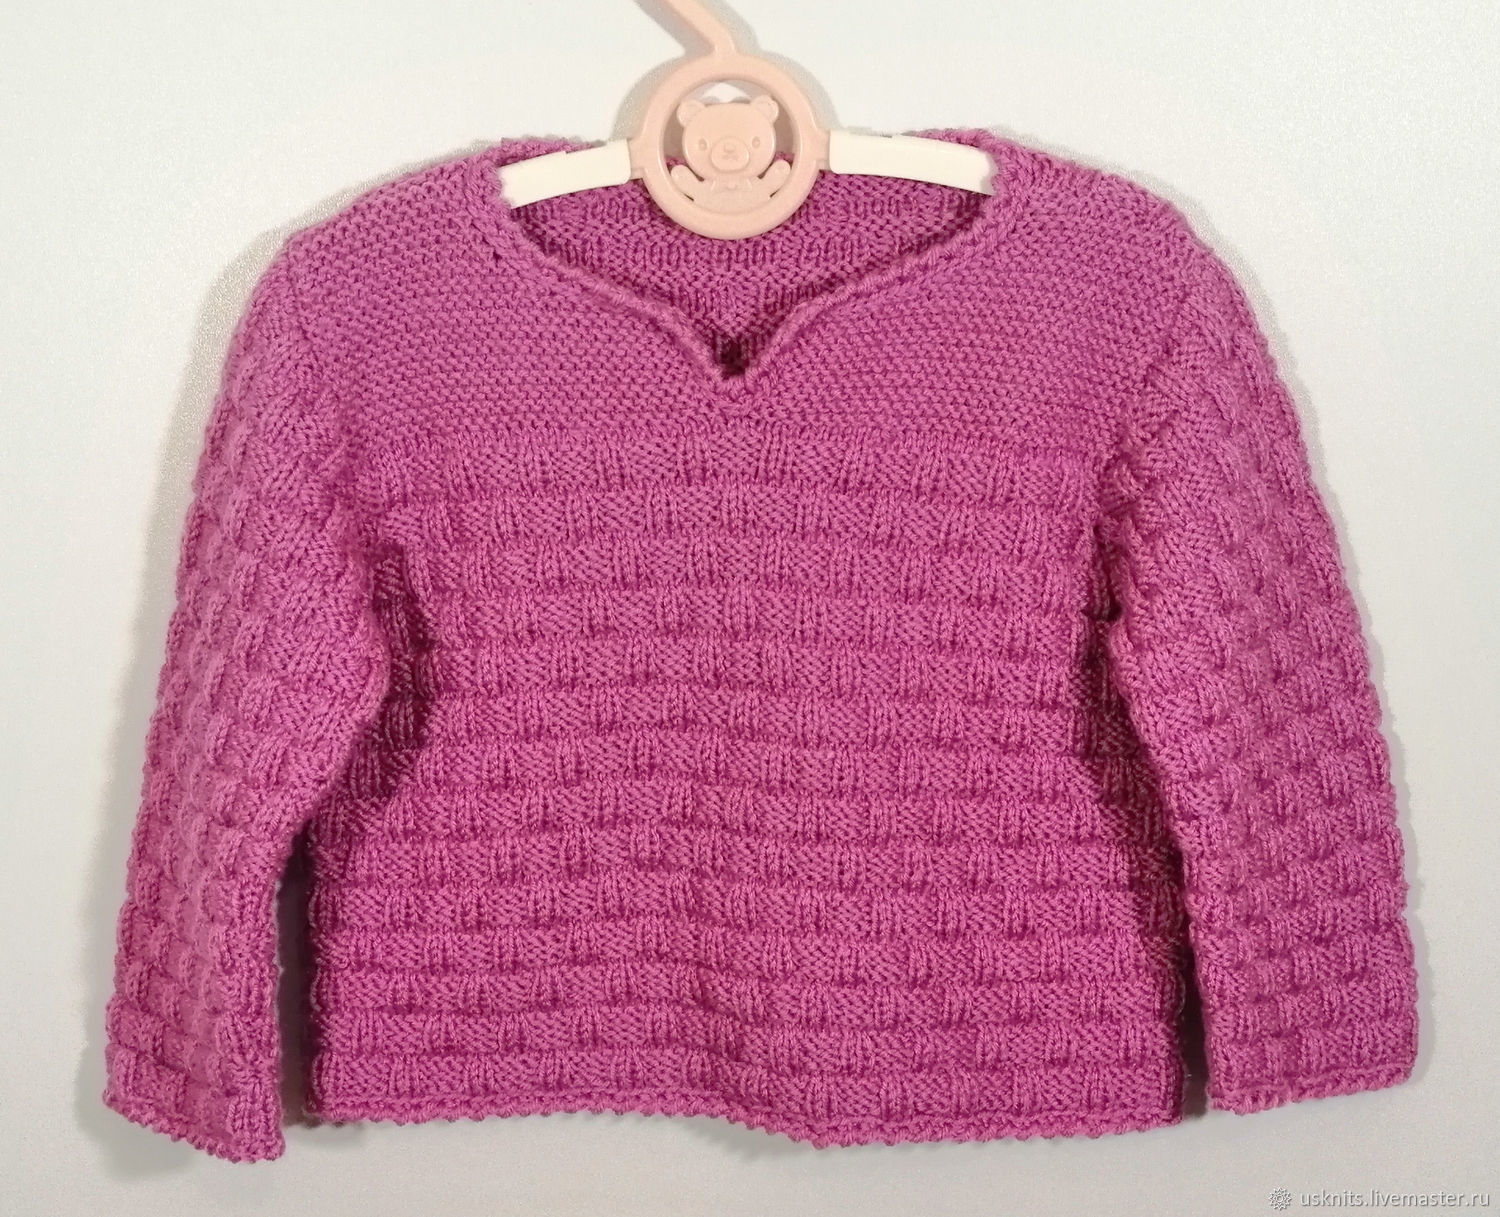 Children's knitted jumper (sweater) without closure, Sweaters and jumpers, Korolev,  Фото №1